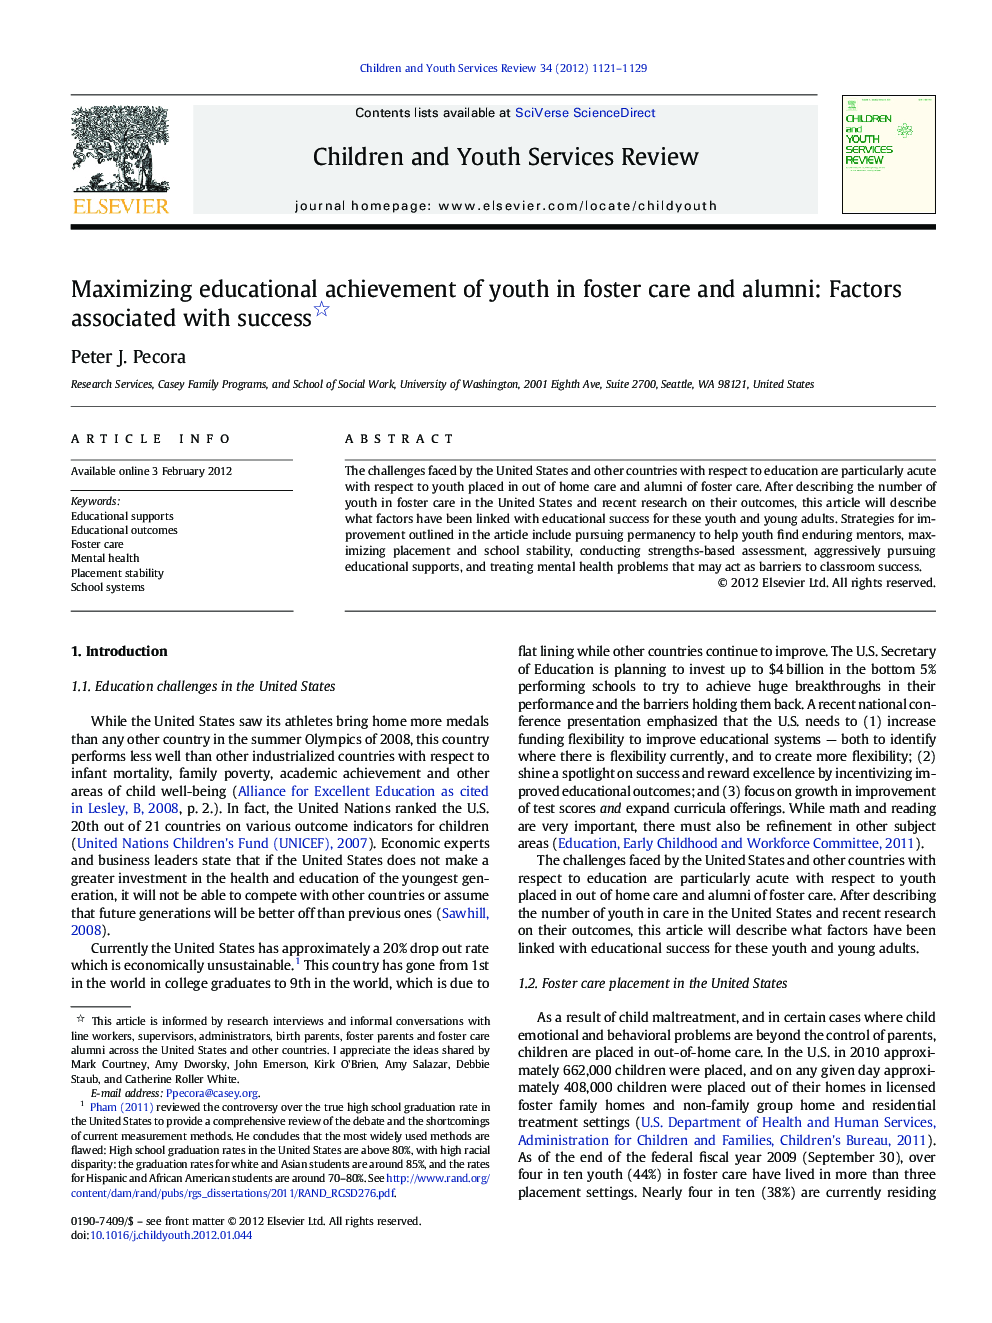 Maximizing educational achievement of youth in foster care and alumni: Factors associated with success 